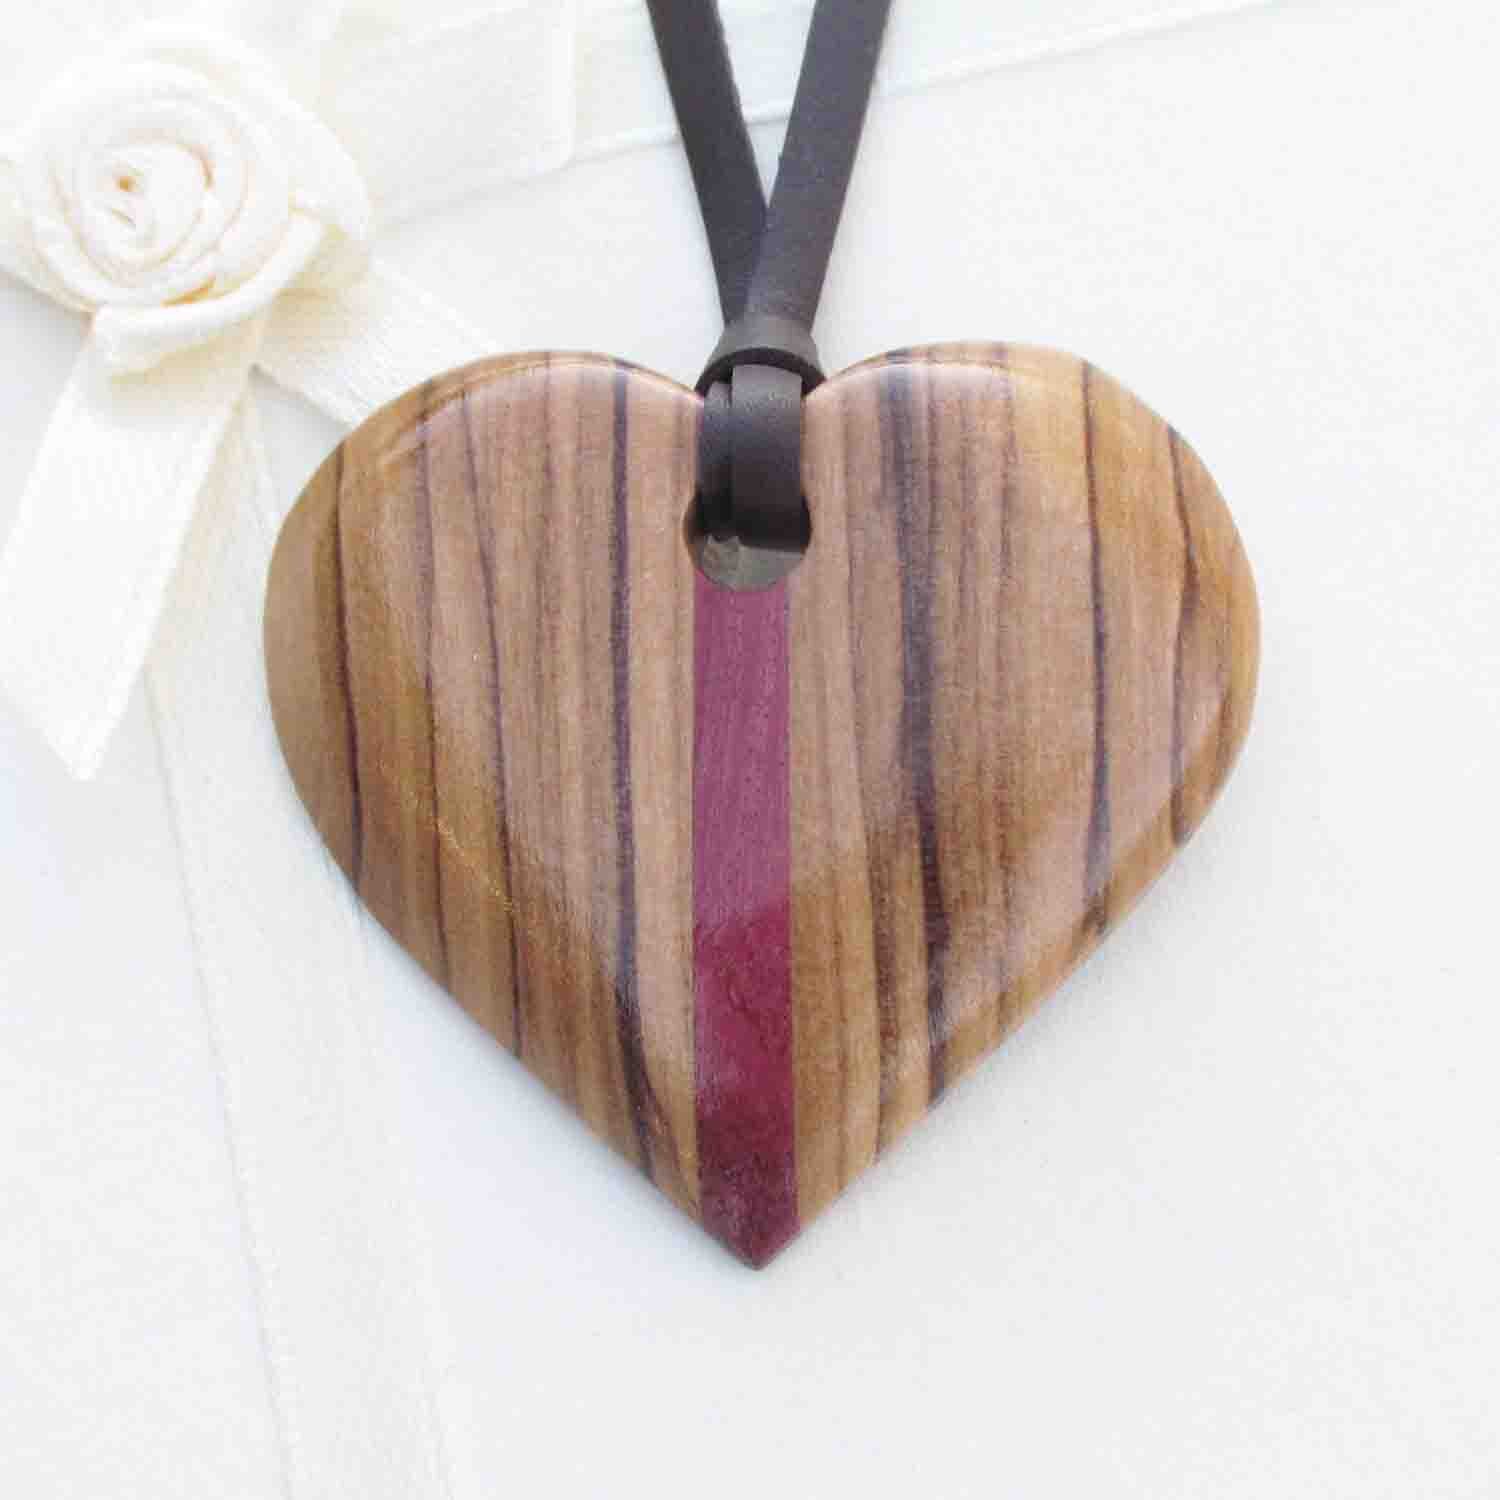 Wooden gifts lovingly handcrafted to